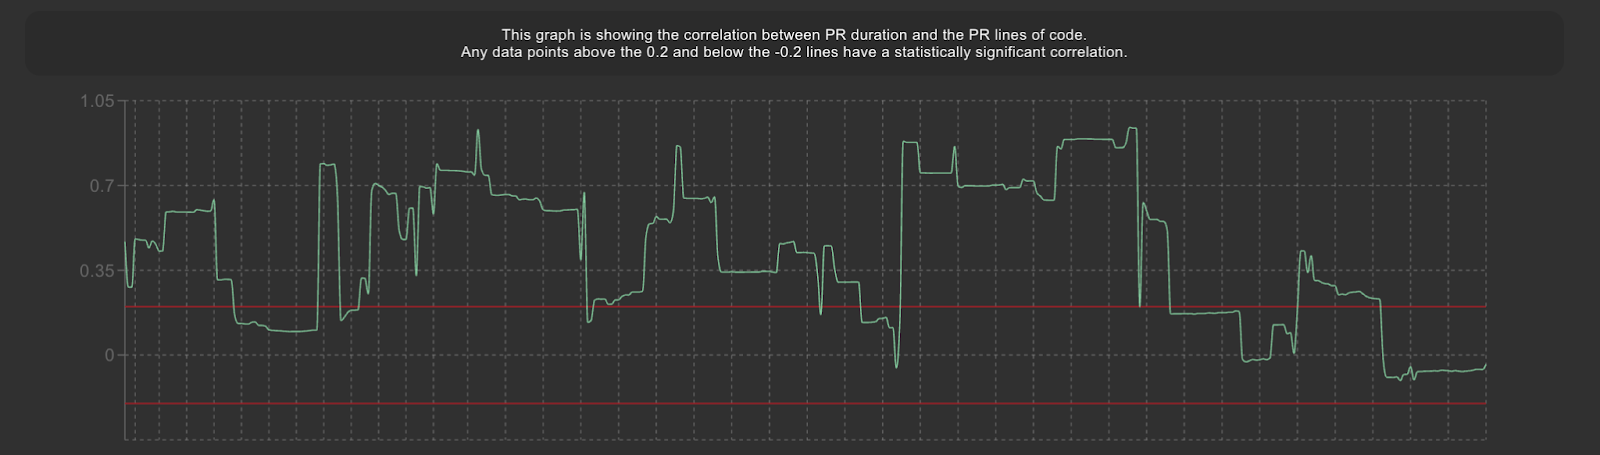 Lead Time to PR Size Correlation over time chart for me